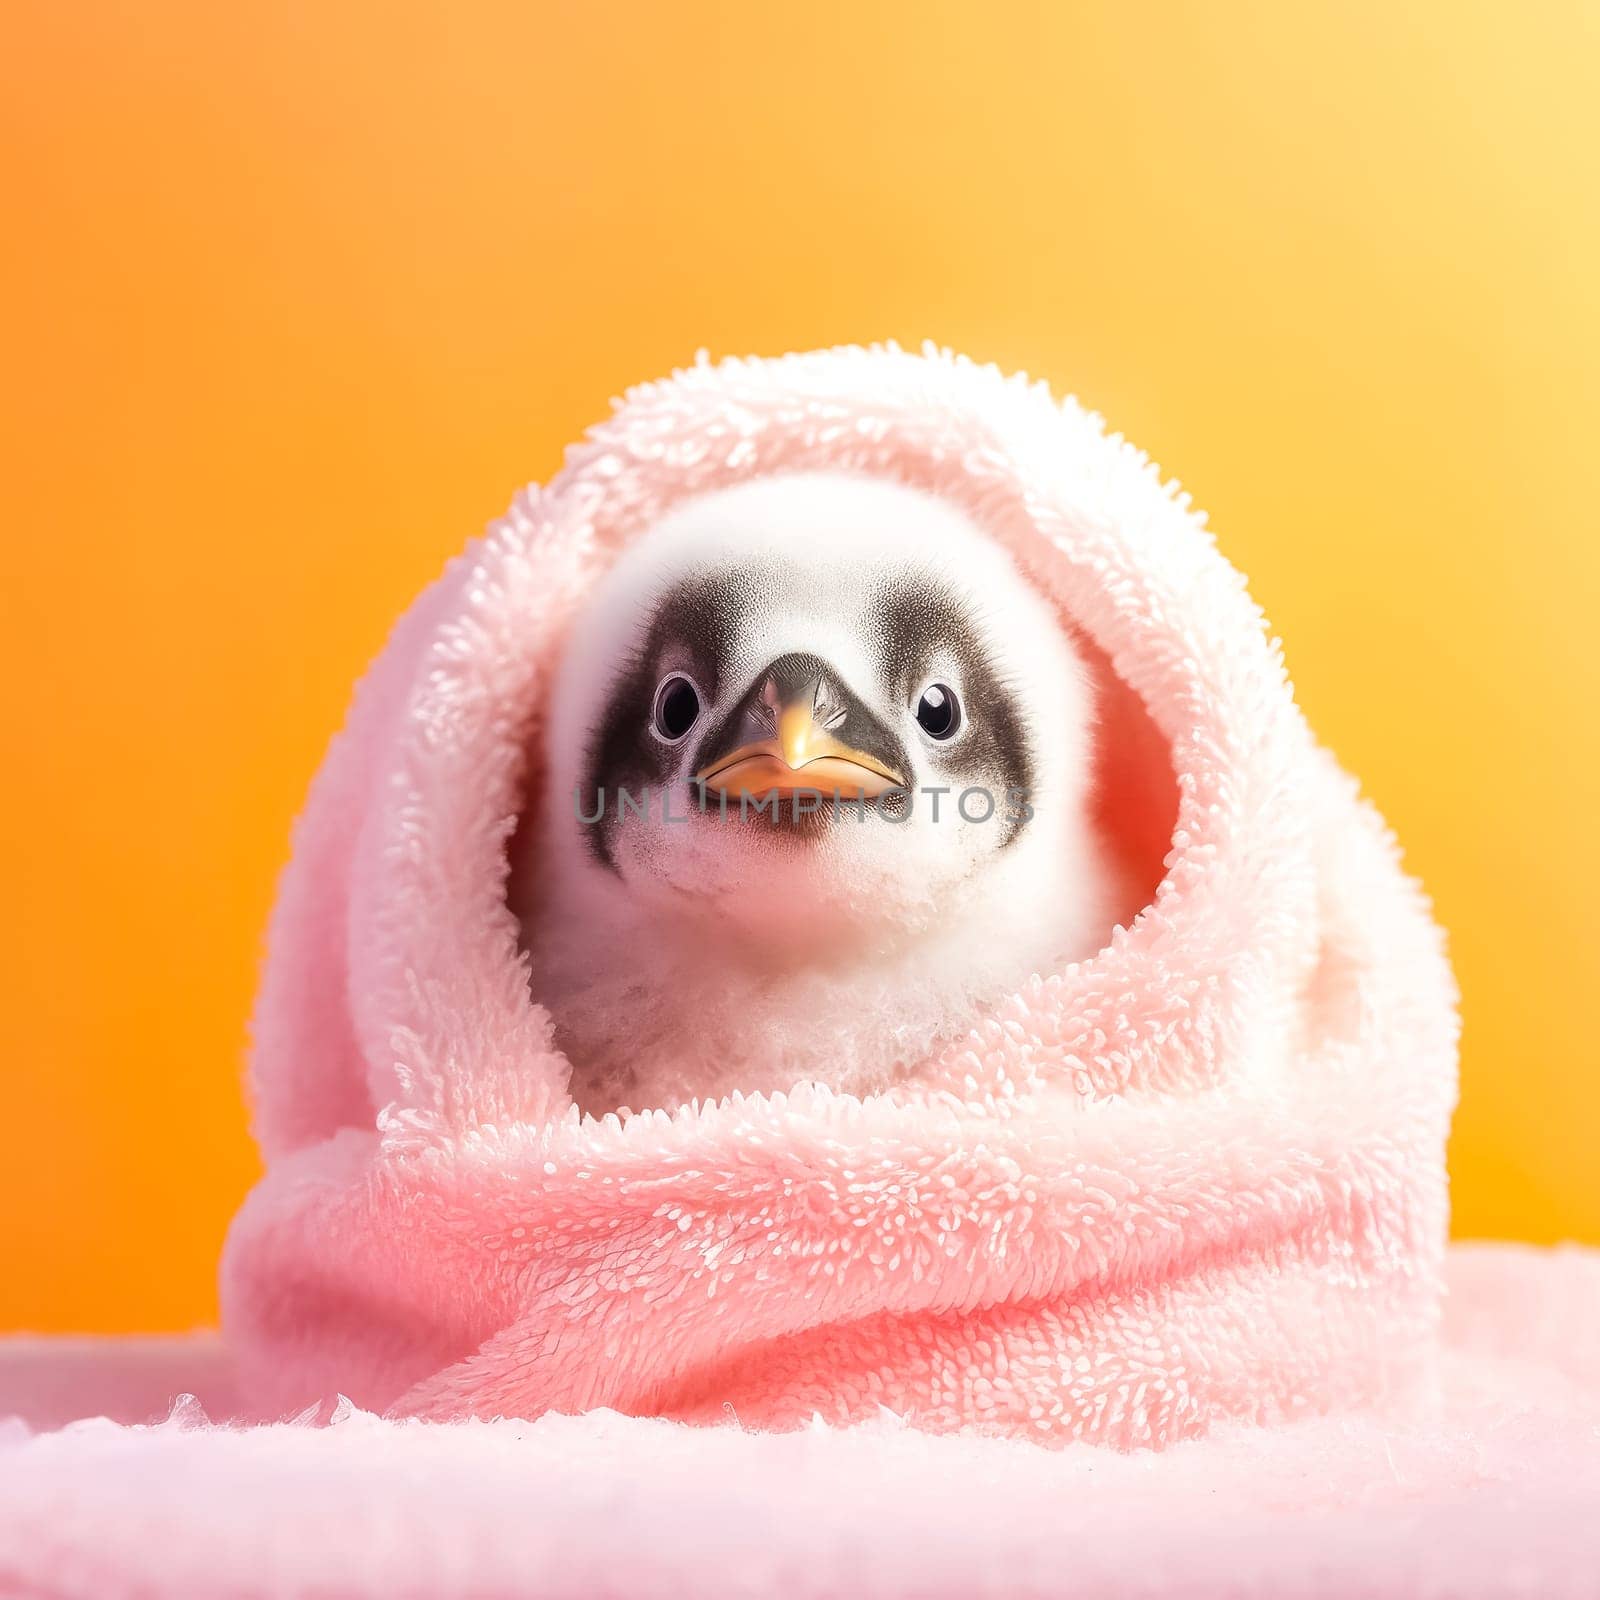 A charming penguin wrapped snugly in a towel after a bath, radiating warmth and charm against a colorful background.